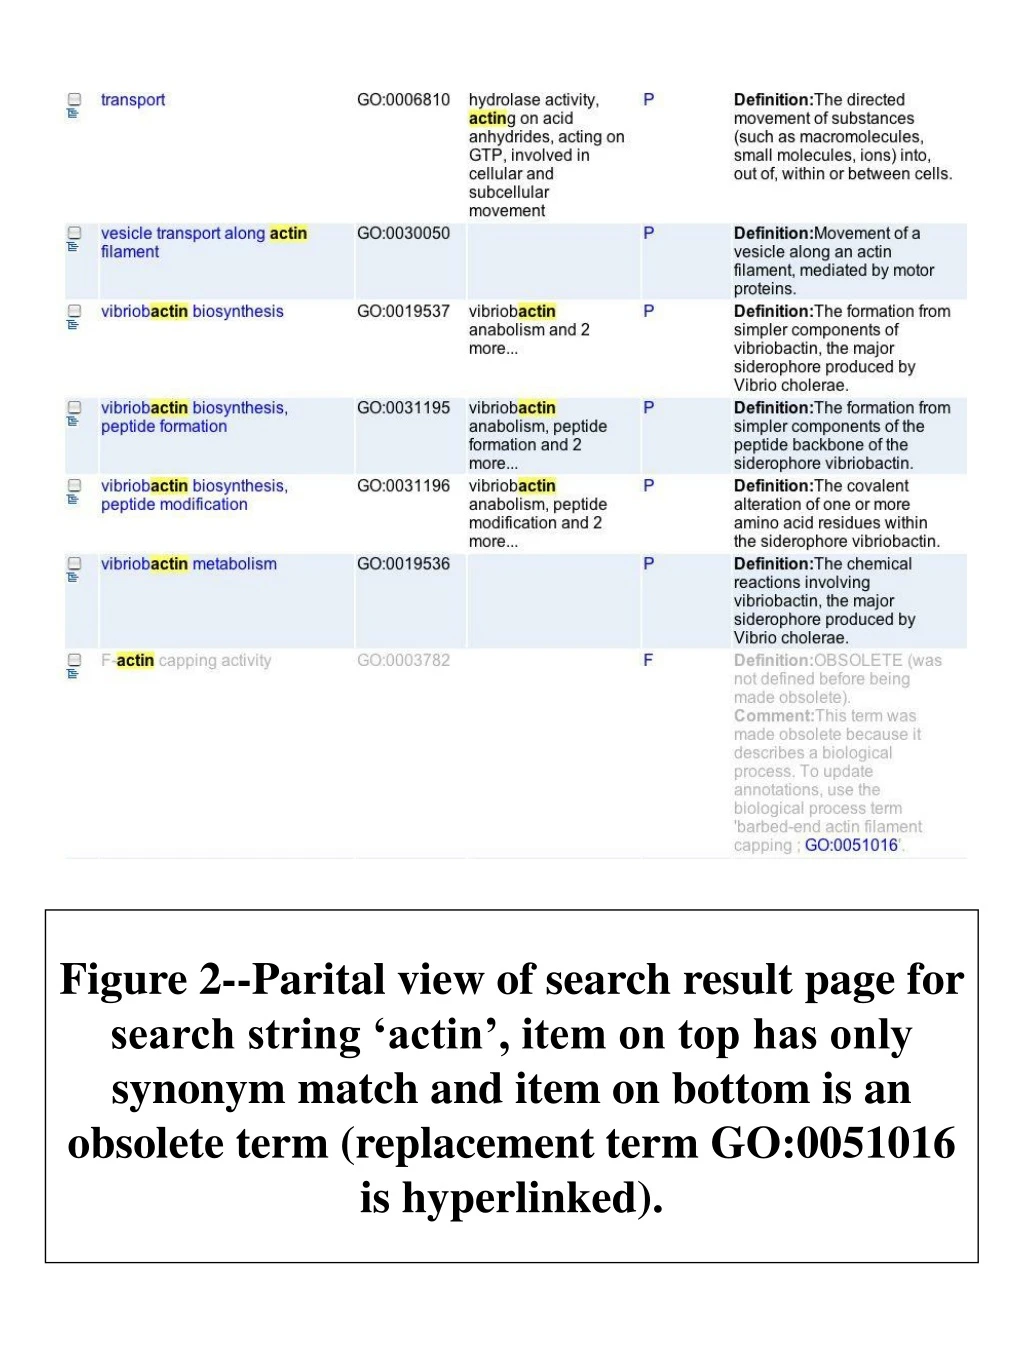 figure 2 parital view of search result page